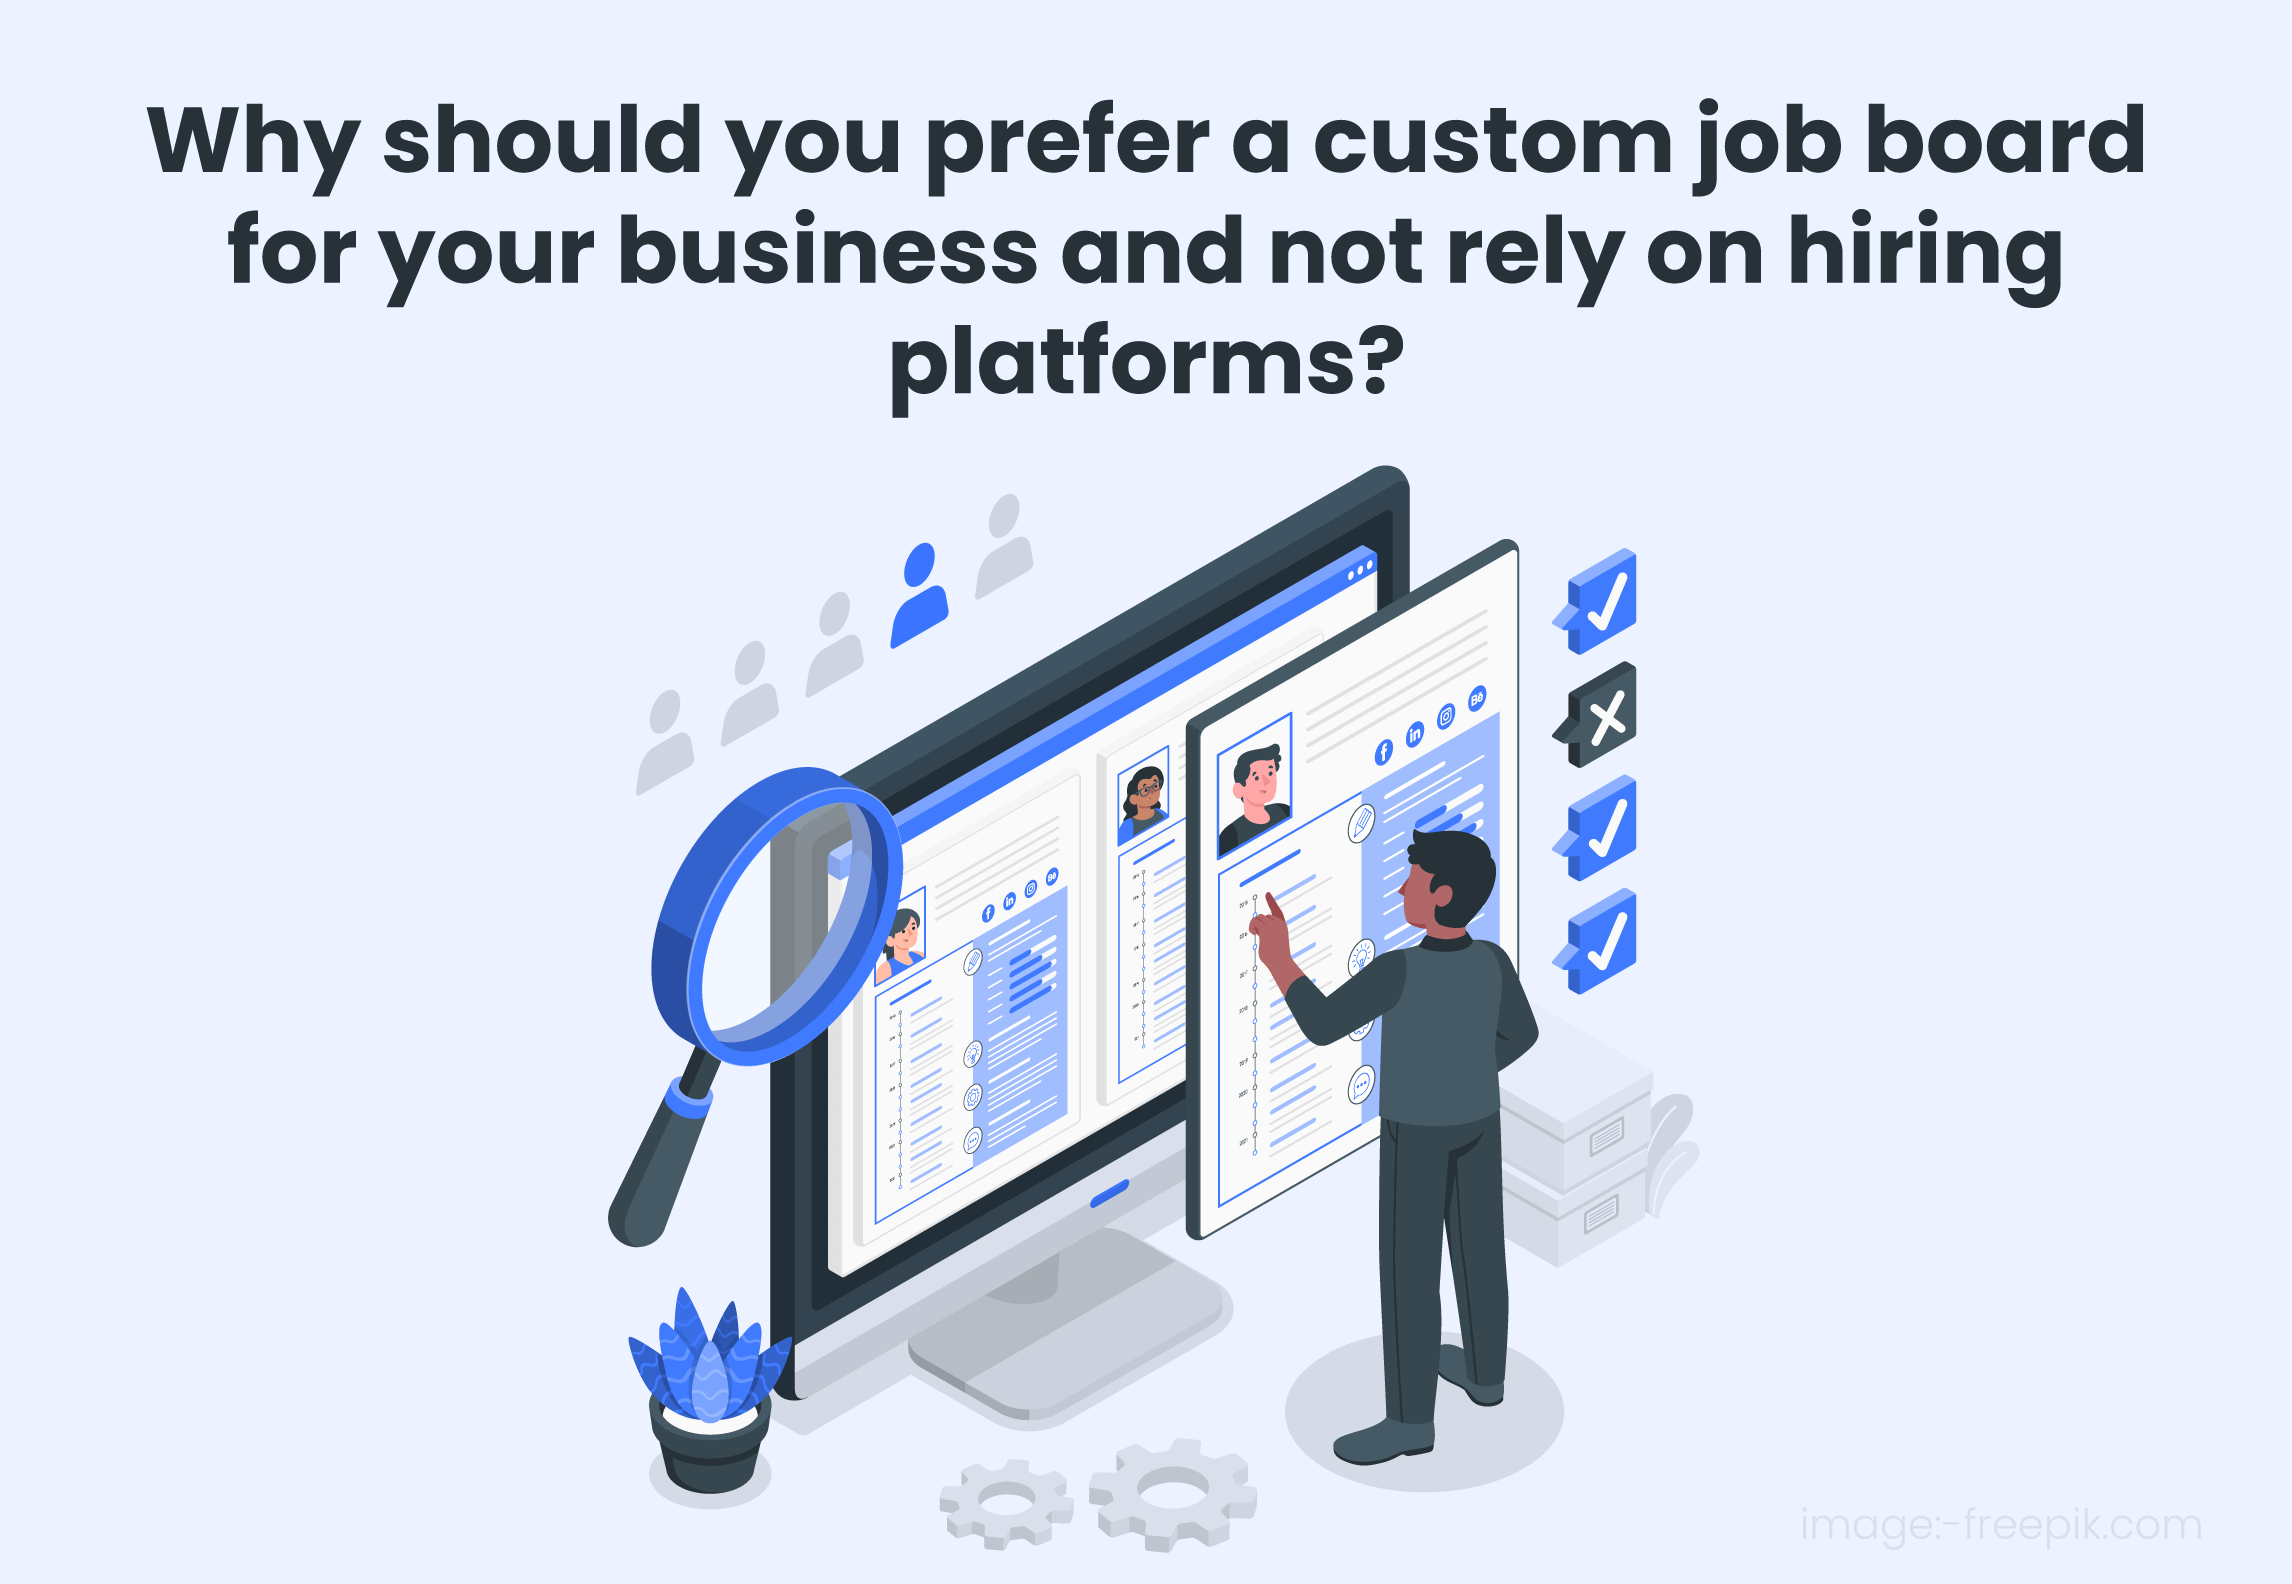 Why Should You Prefer A Custom Job Board For Your Business And Not Rely On Hiring Platforms?